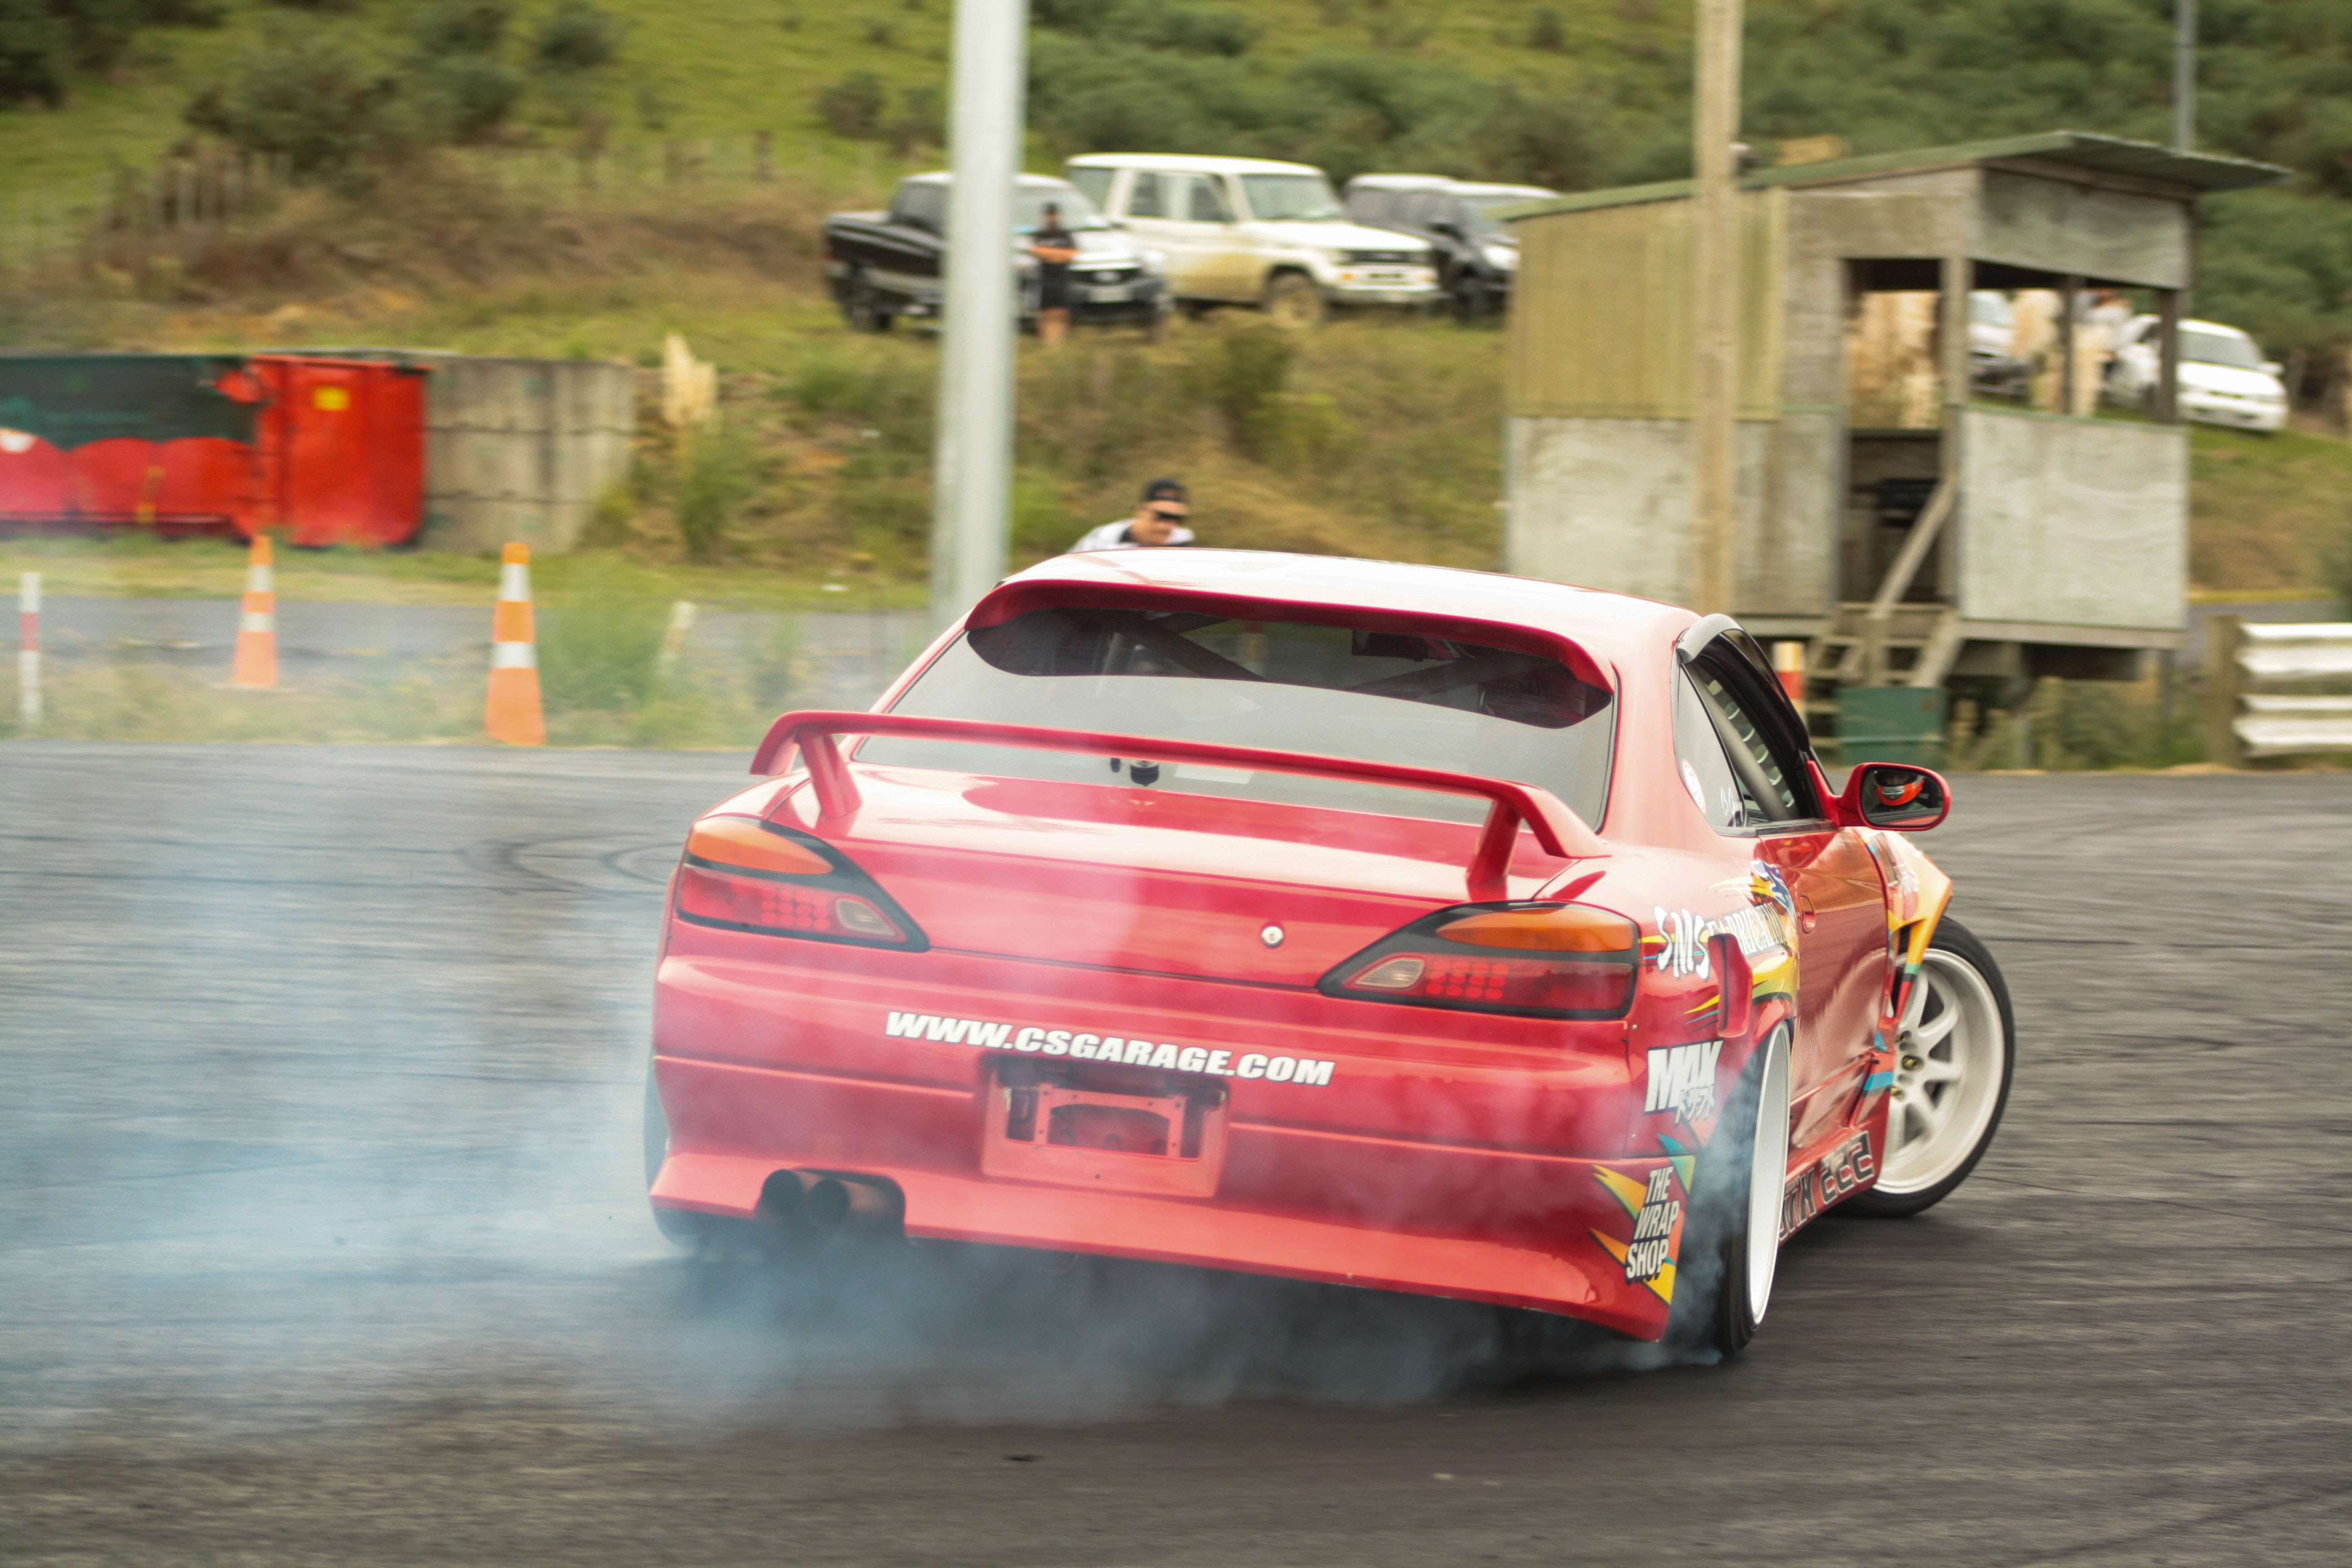 An S15 Silvia, driven by Graeme Smythe, performing a drift at Meremere Dragway. Photo: Ruwade Bryant.